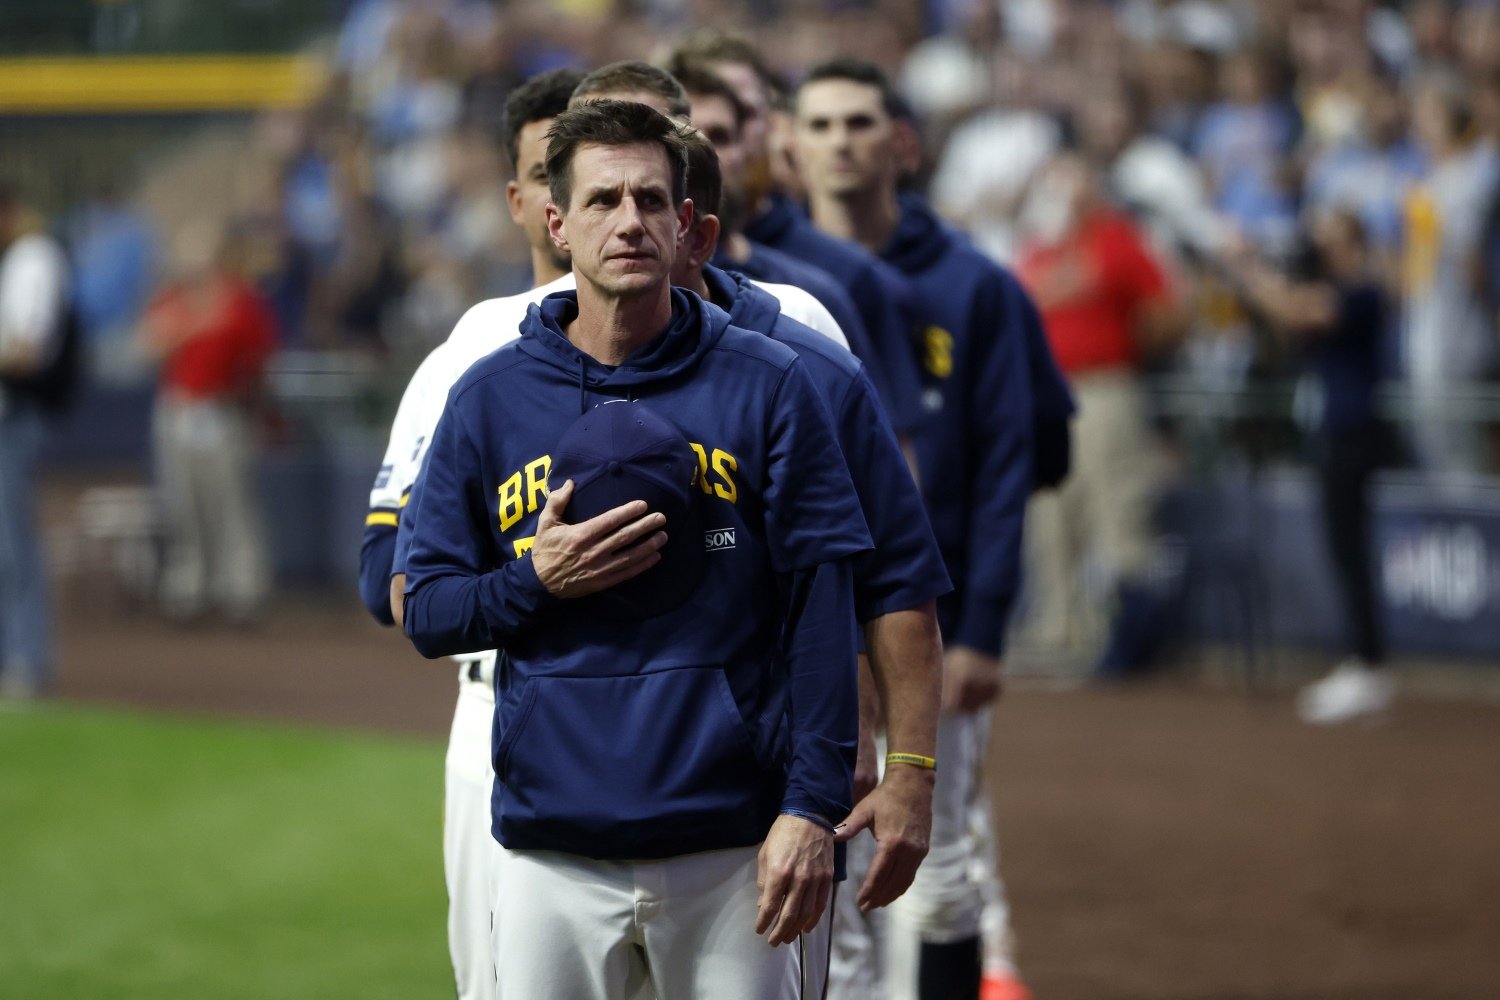 Craig Counsell's Greatest Moments